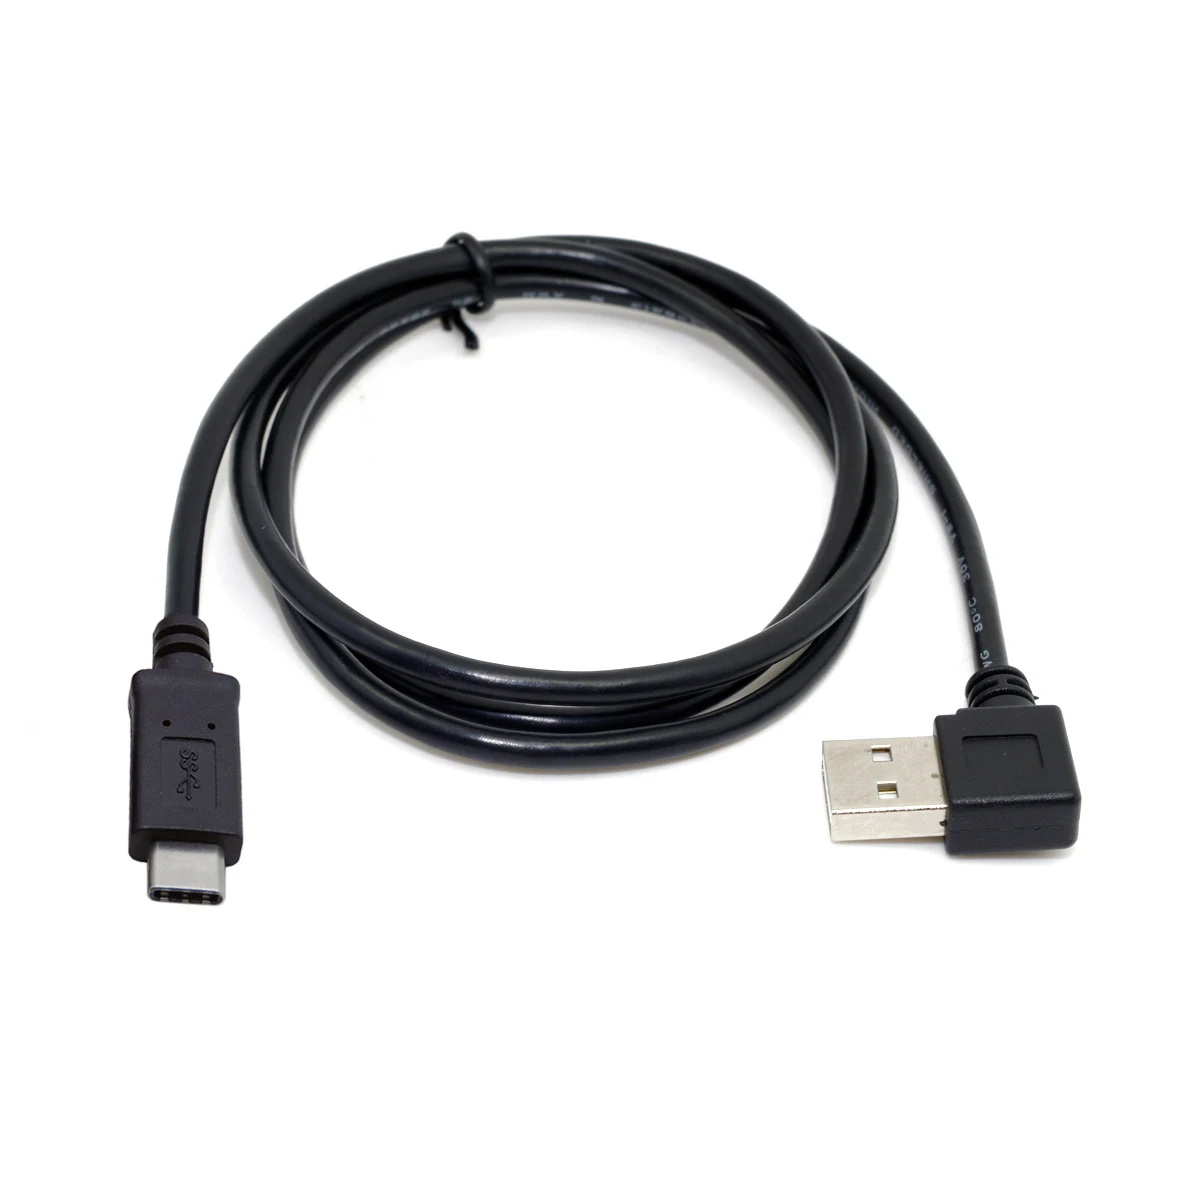 

Chenyang Reversible Design USB 3.0 3.1 Type C Male to 90 Degree Left Right Angled A Male Data Cable for Tablet & Mobile Phone